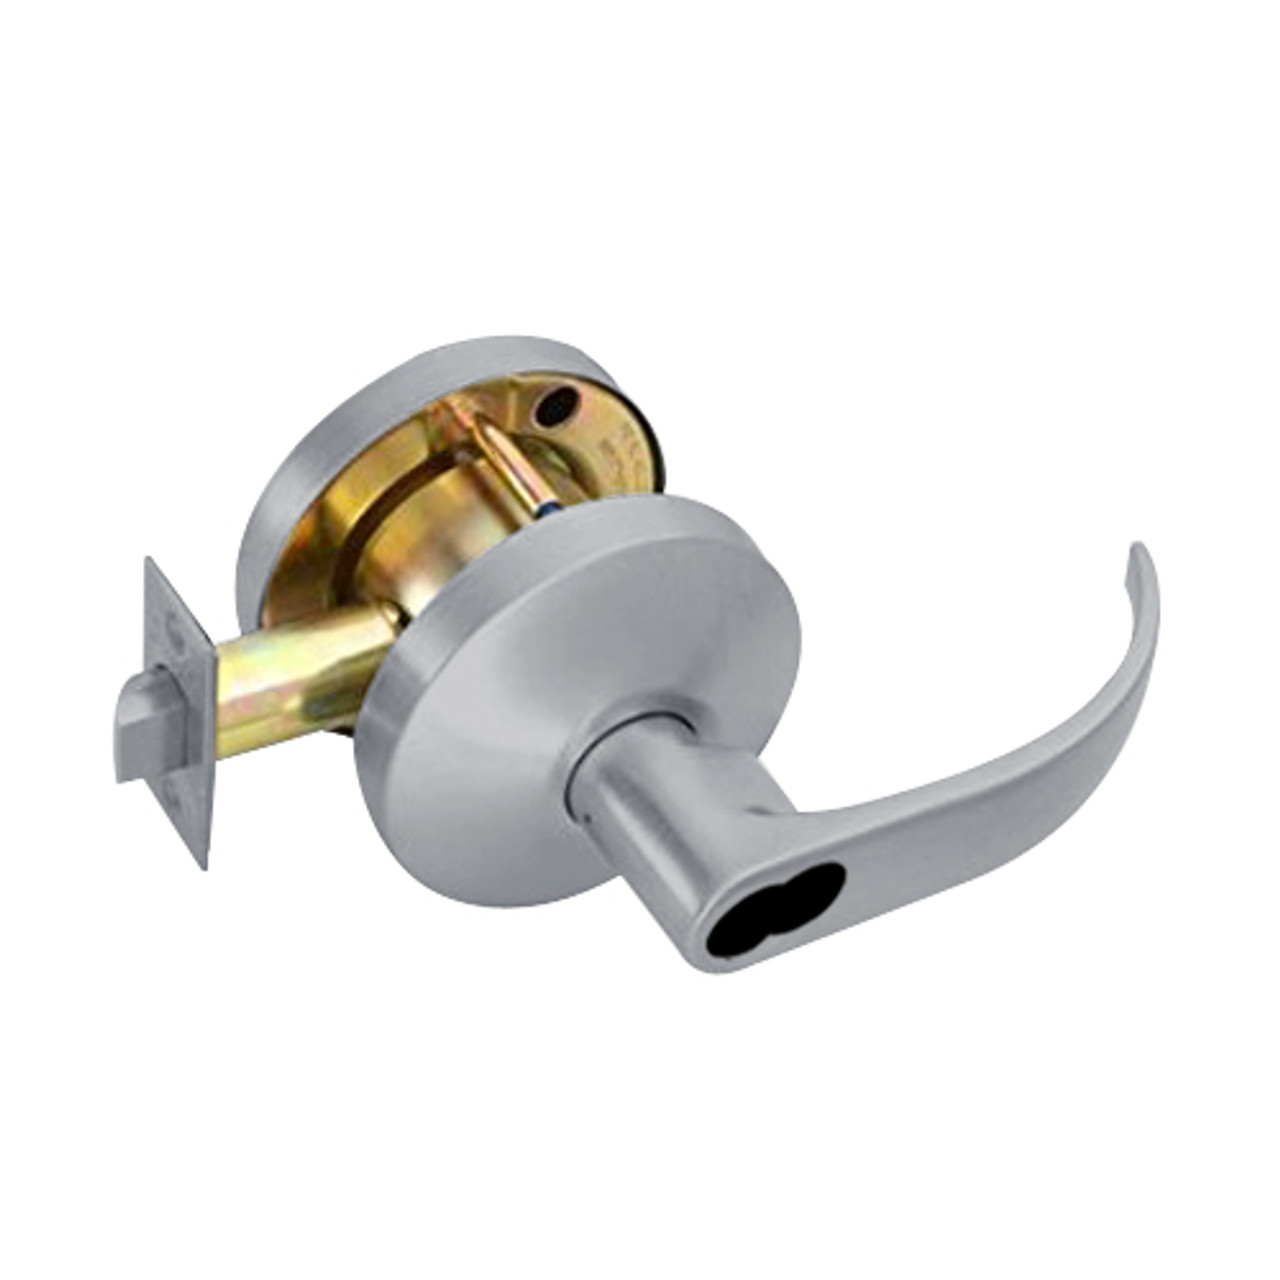 B341BD-Q-626 Falcon B Series Single Cylinder Connecting/Exit Lock with Quantum Lever Style in Satin Chrome Finish